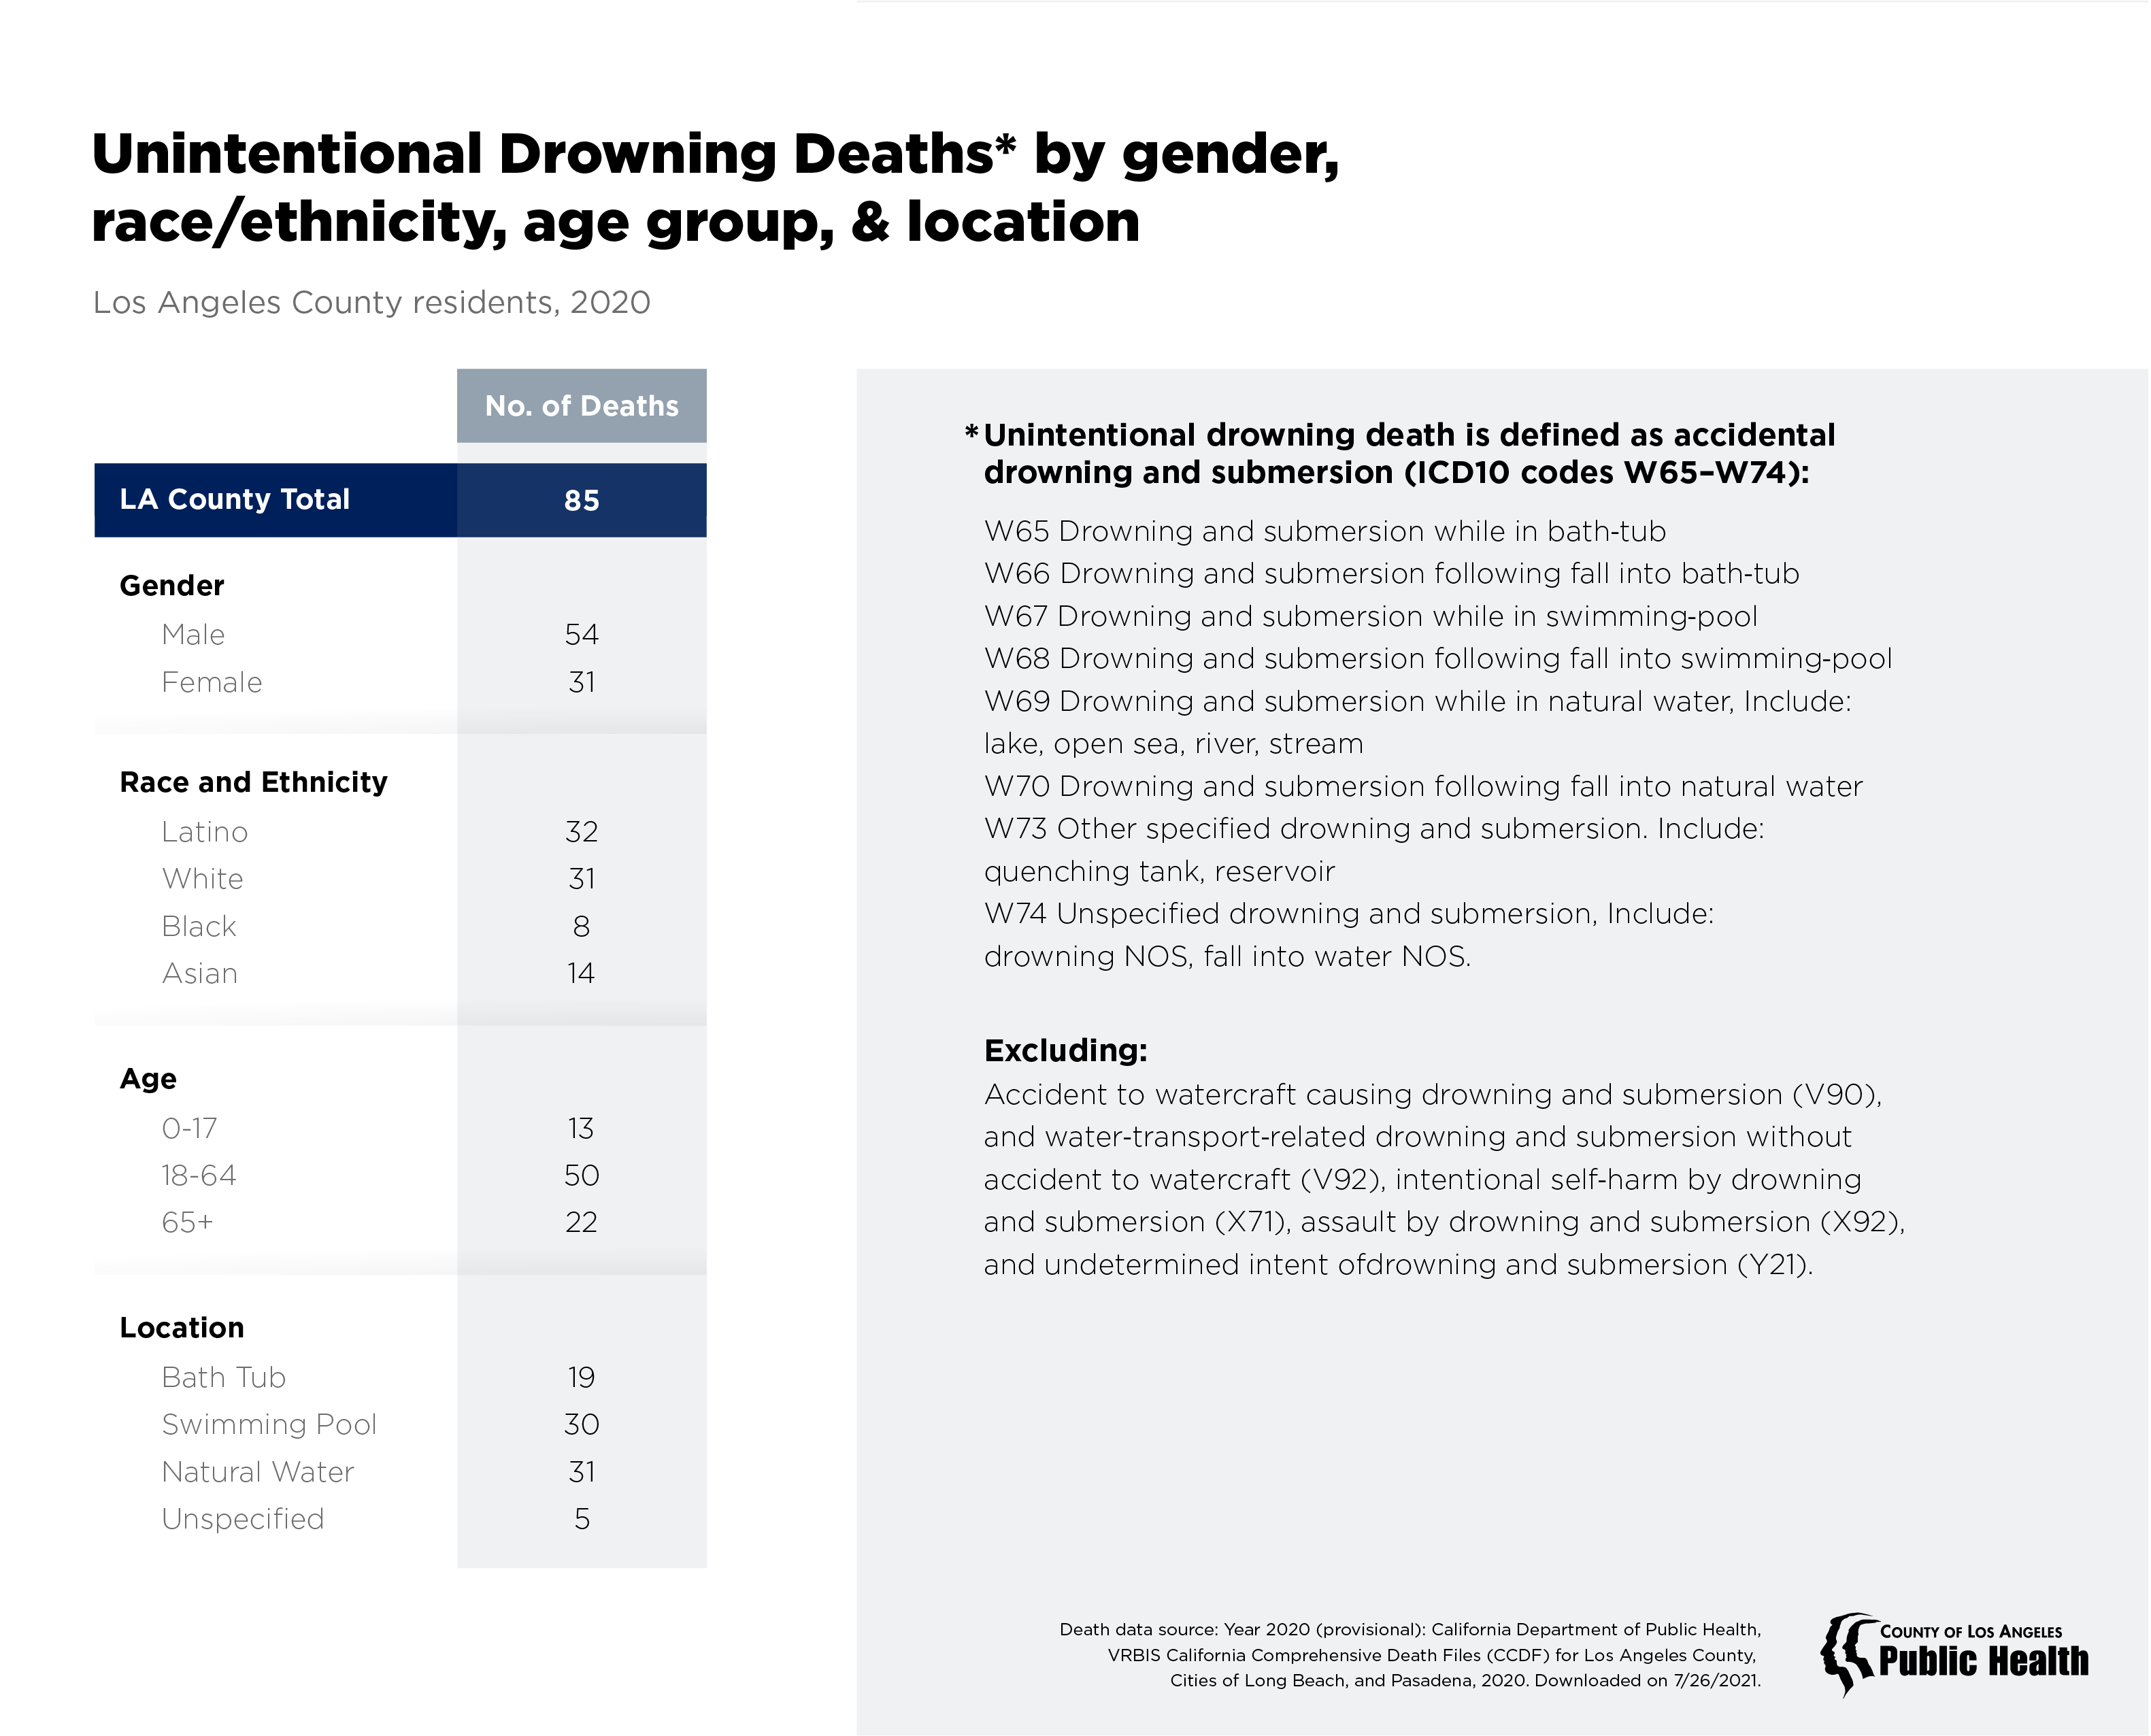 Data sheet on the numbers of unintentional drowning deaths in Los Angeles County